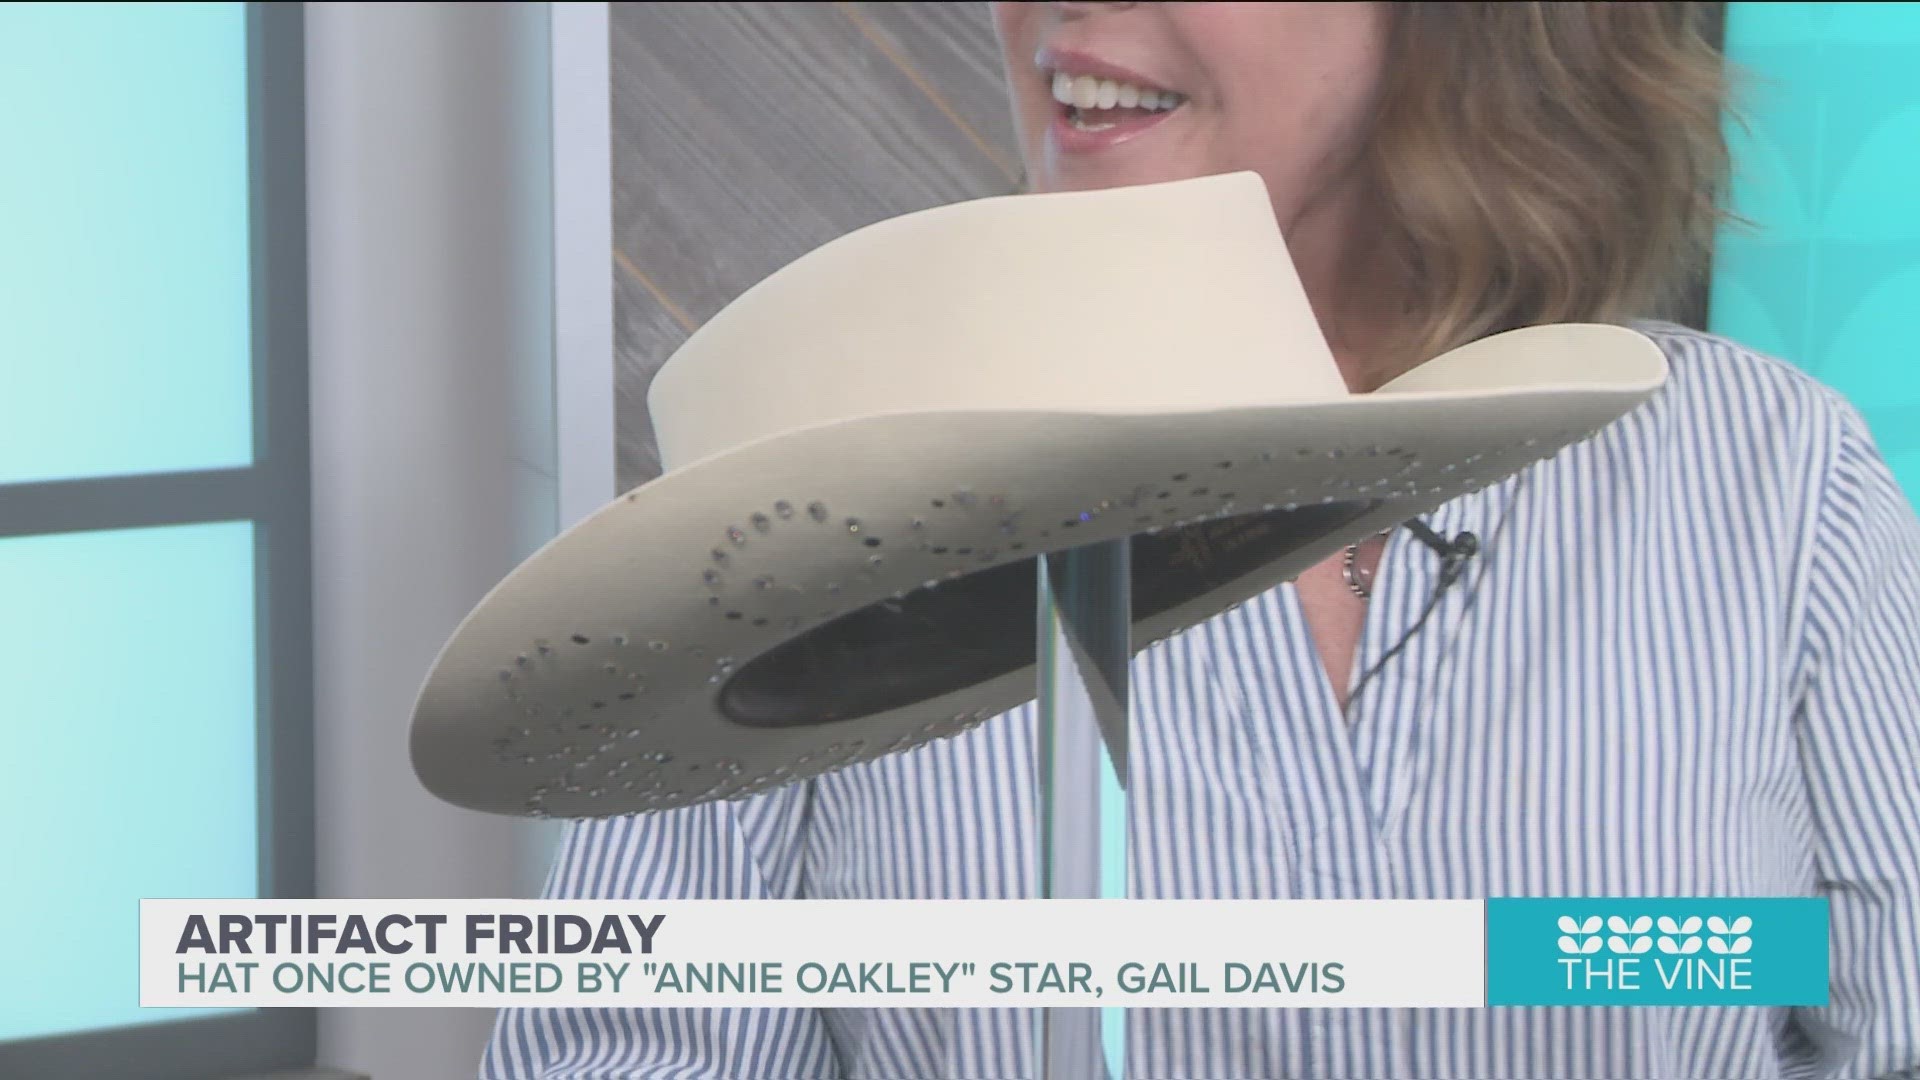 acceleration Næb genvinde Artifact Friday: Hat owned by "Annie Oakley" star Gail Davis | thv11.com